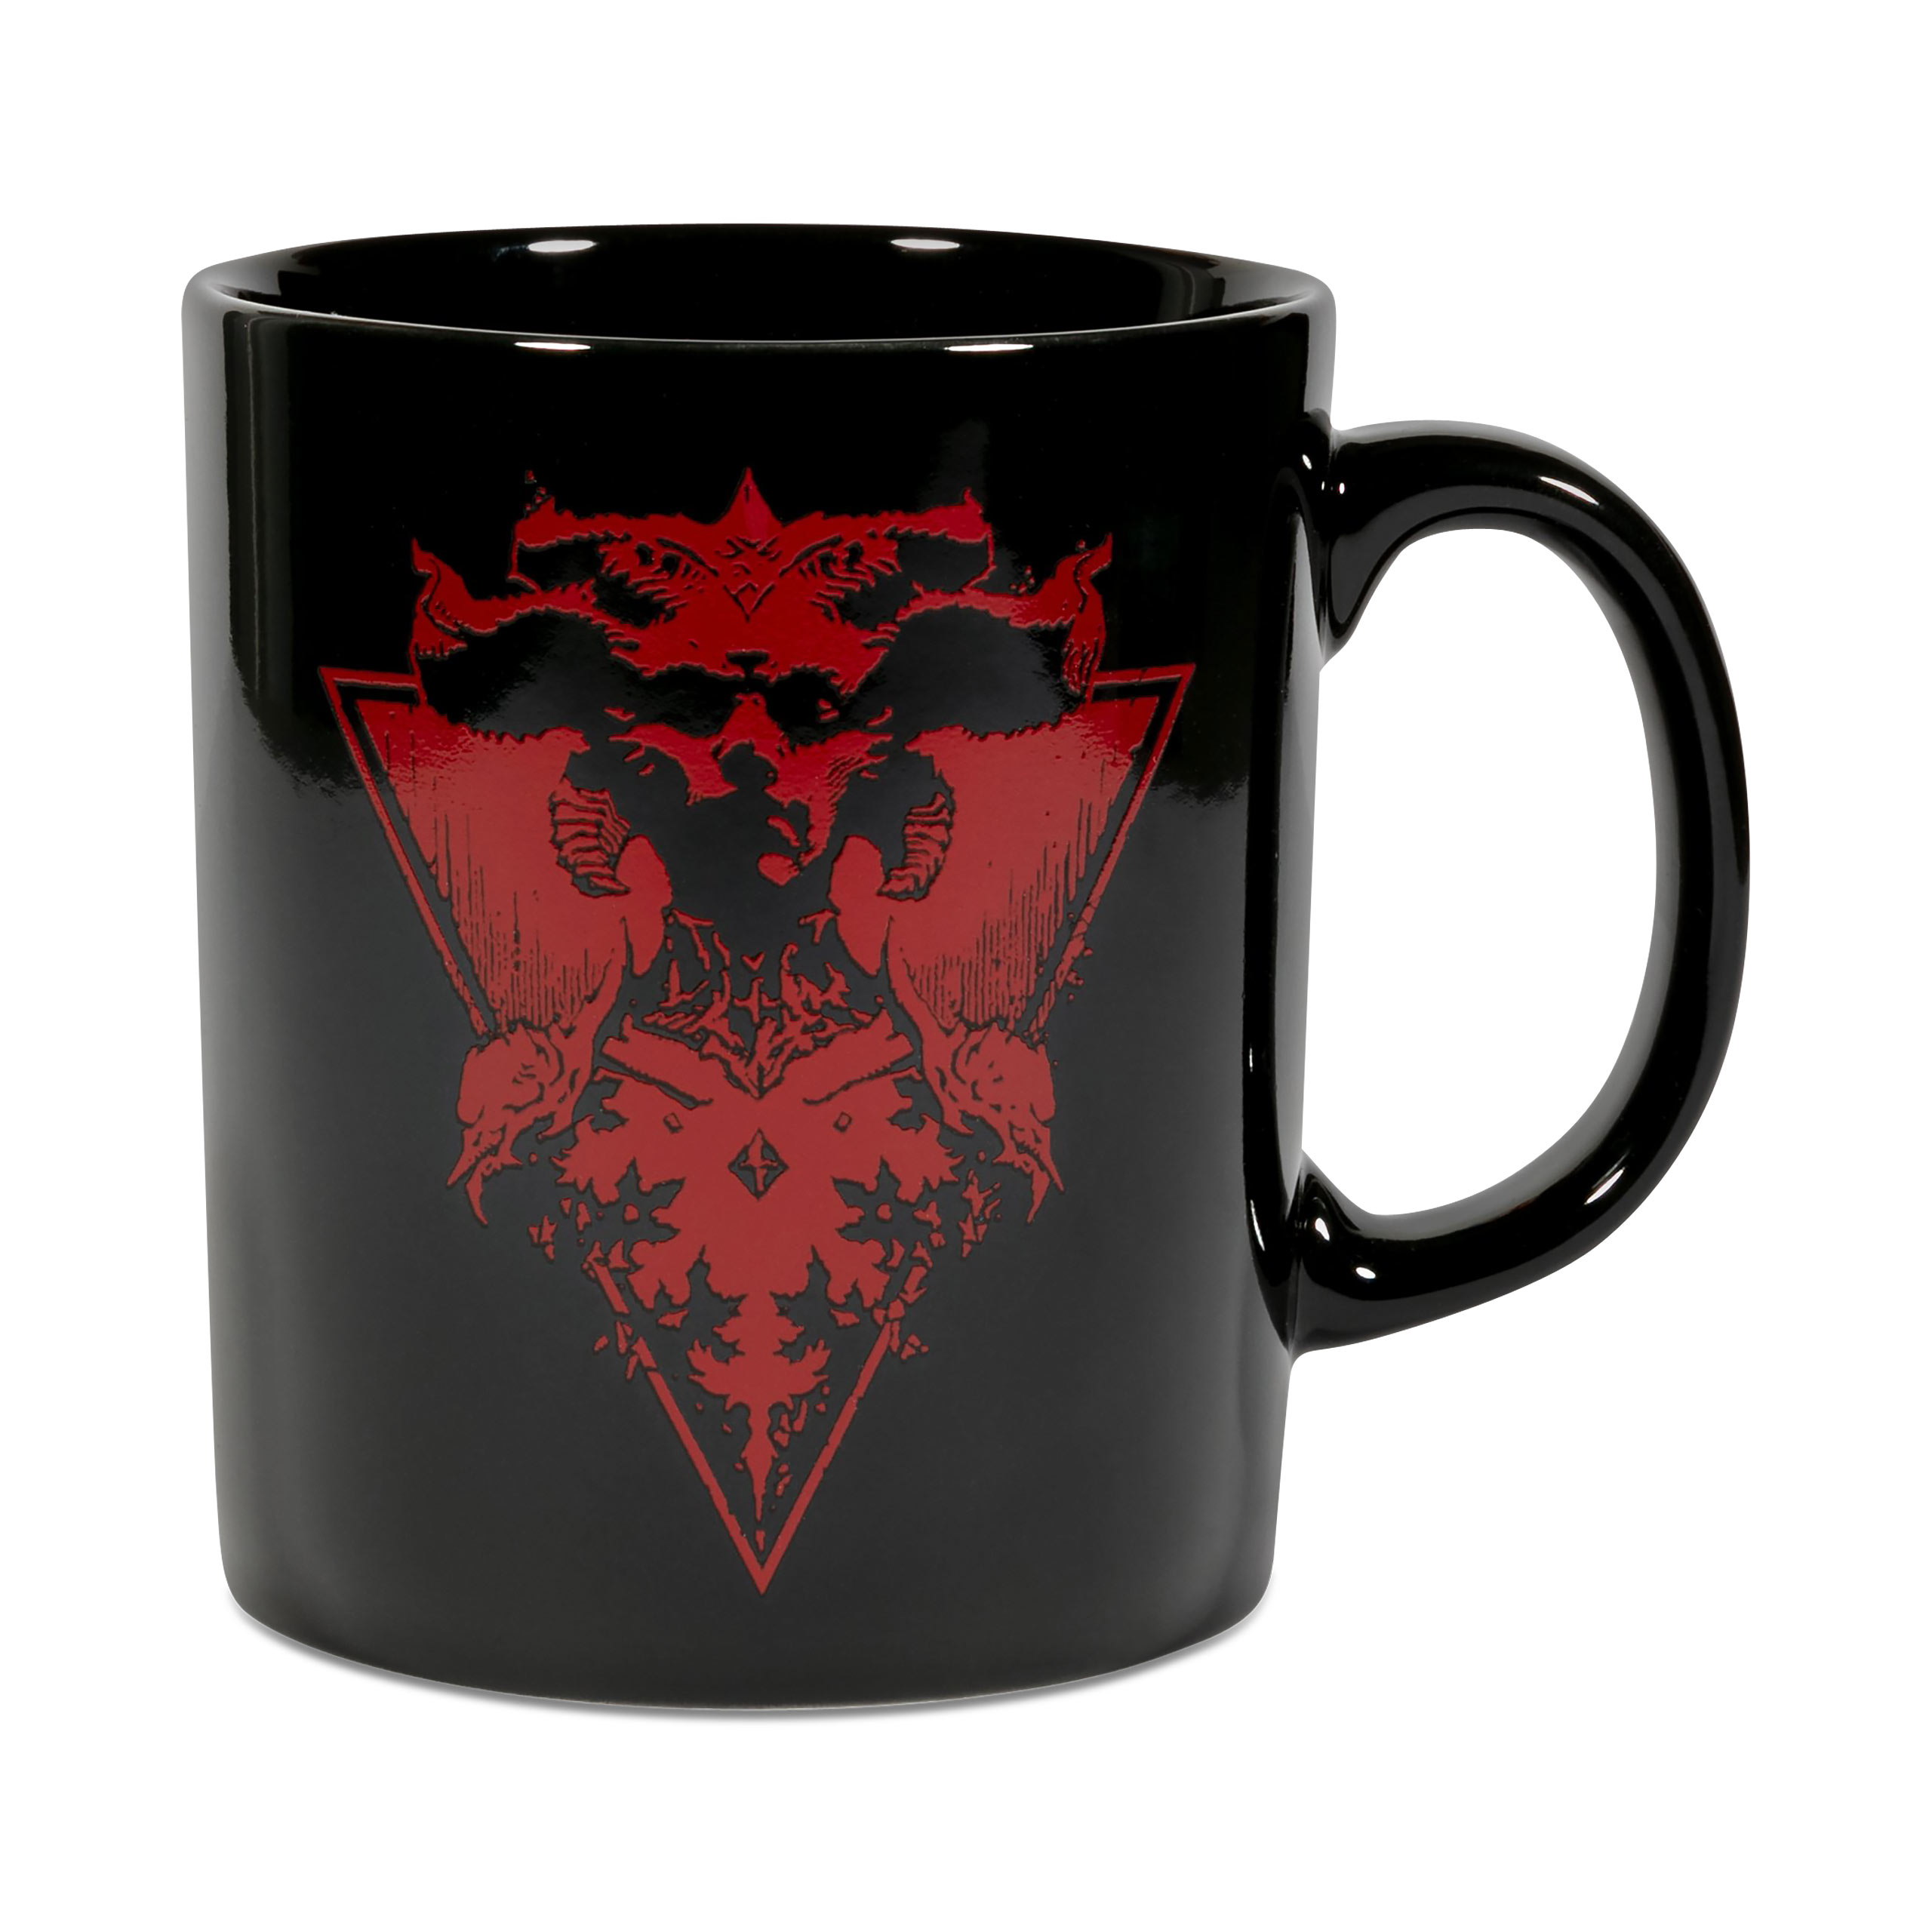 Diablo IV - Hotter Than Hell Cup black